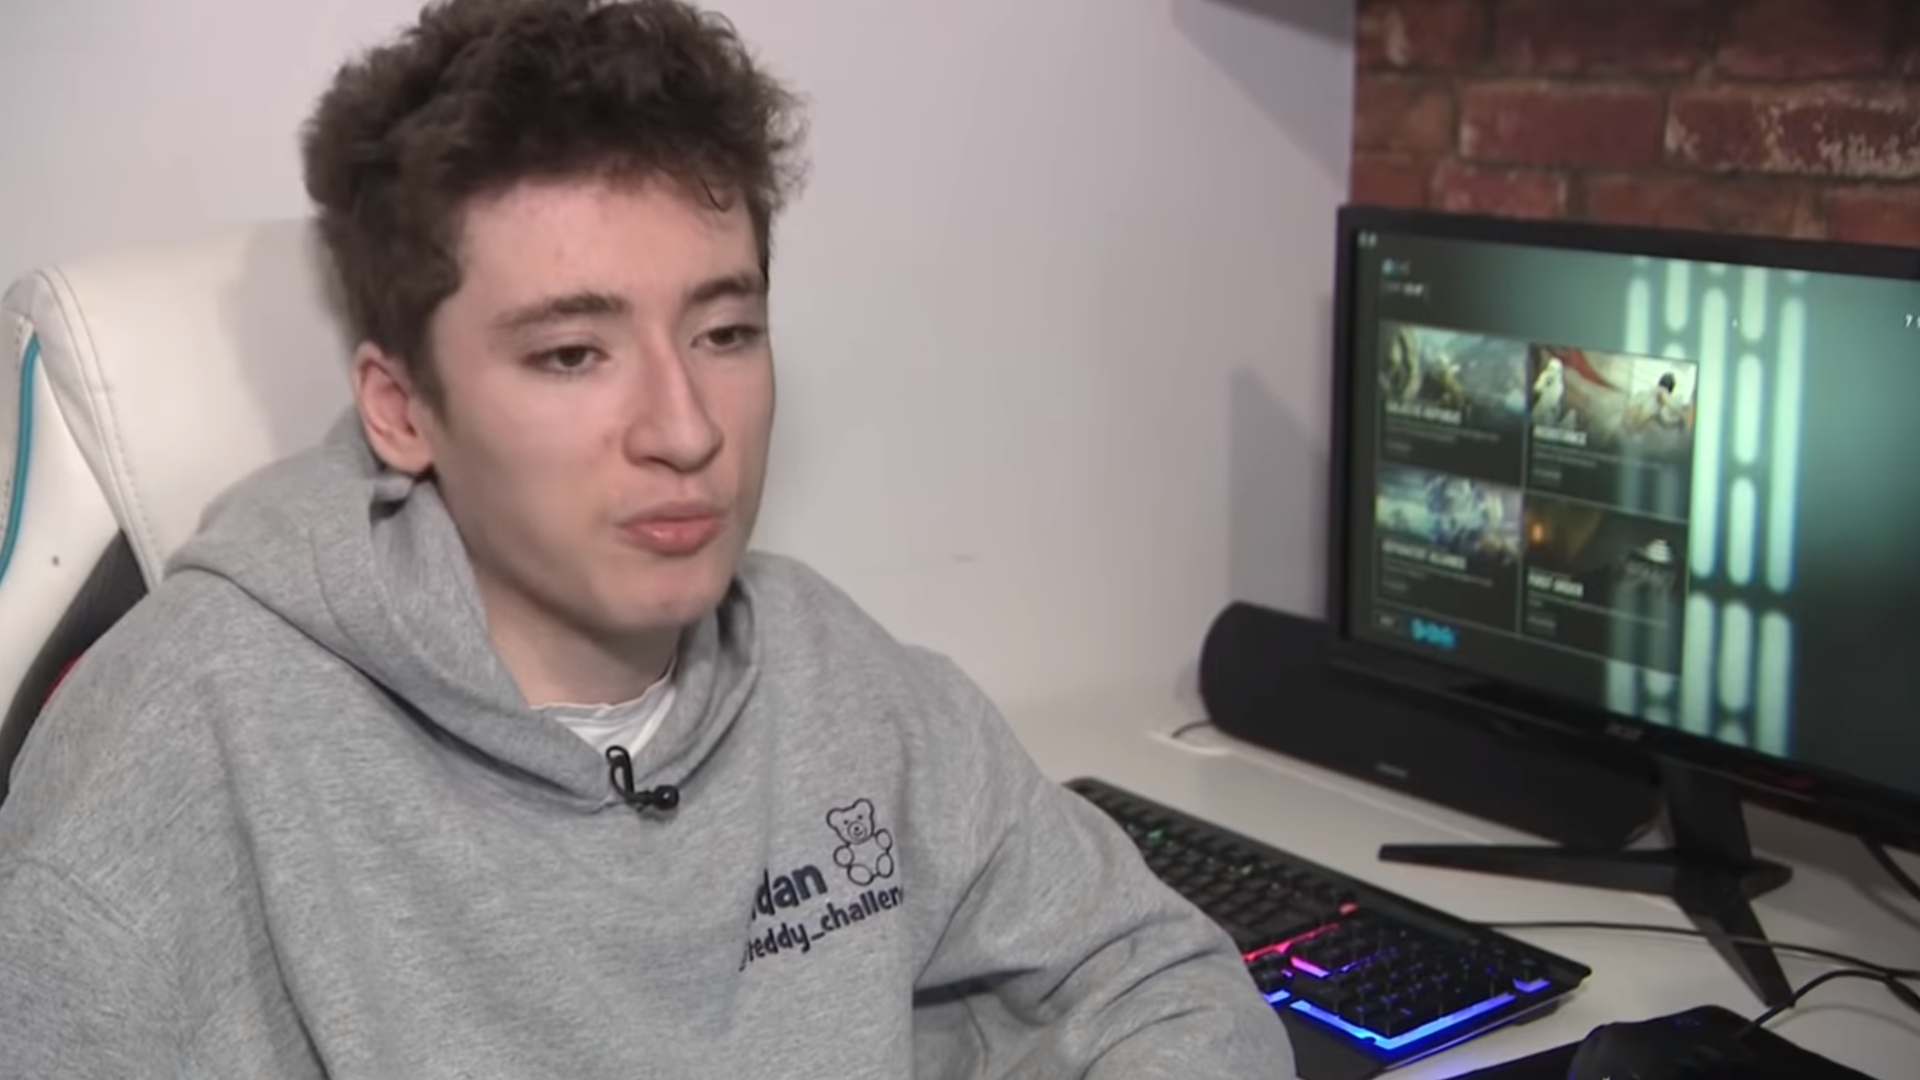 A Gamer In Texas Helped Save Her UK Teammate After Hearing Him Have A Seizure Online